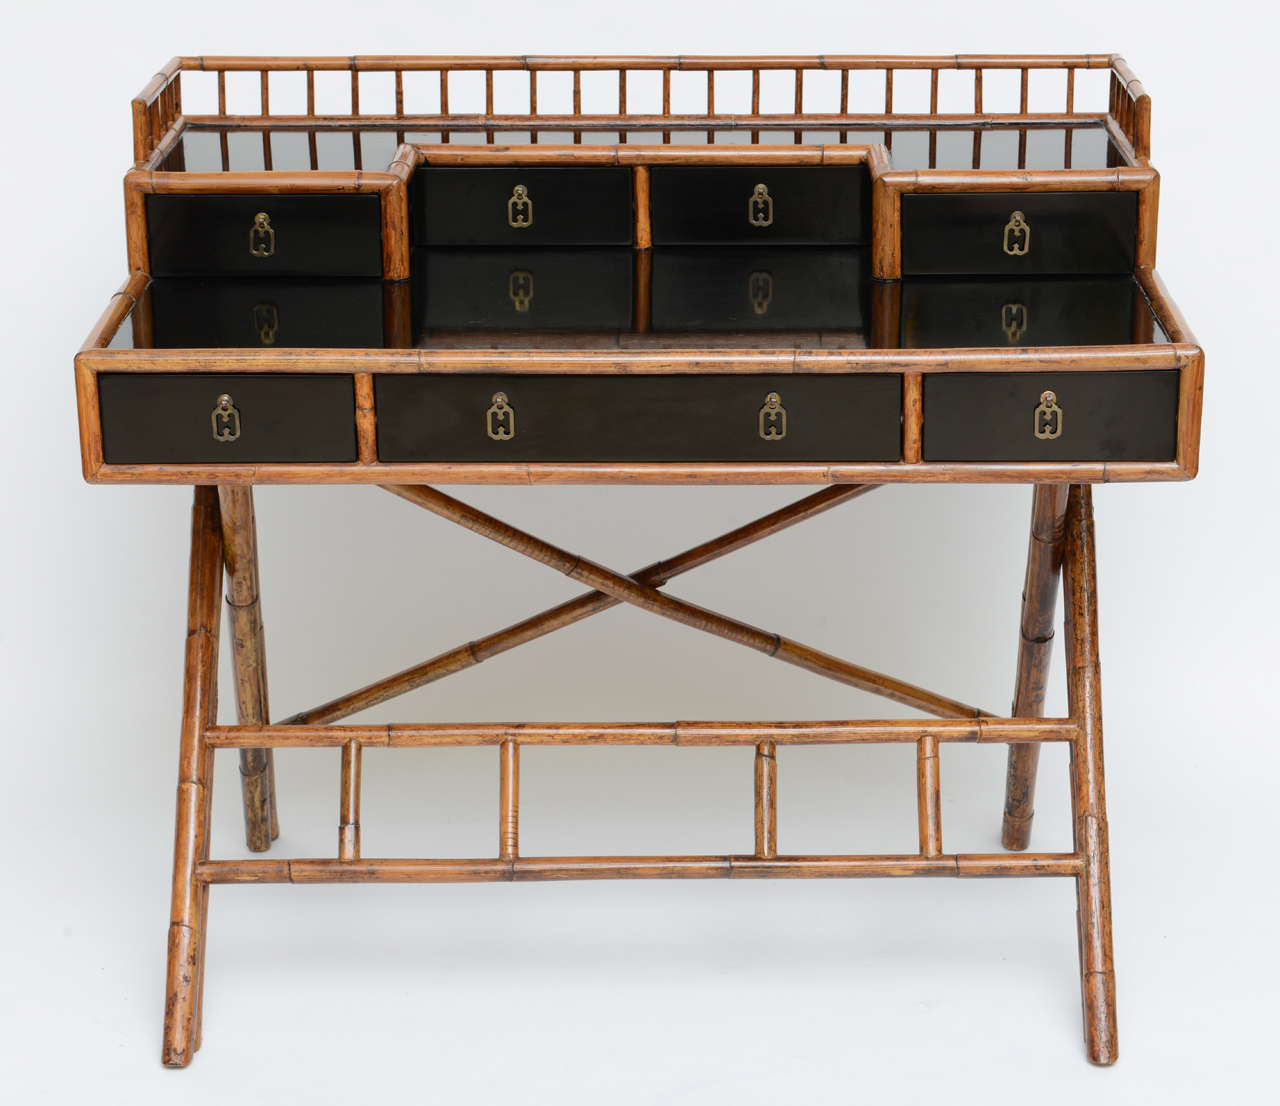 SOLD  In an Anglo-Japanese style springing from the Brighton Pavilion, this black painted and bamboo chinoiserie desk or writing table is quite charming with its gallery of small drawers and bamboo gallery, bamboo edges and elaborate base.  Very